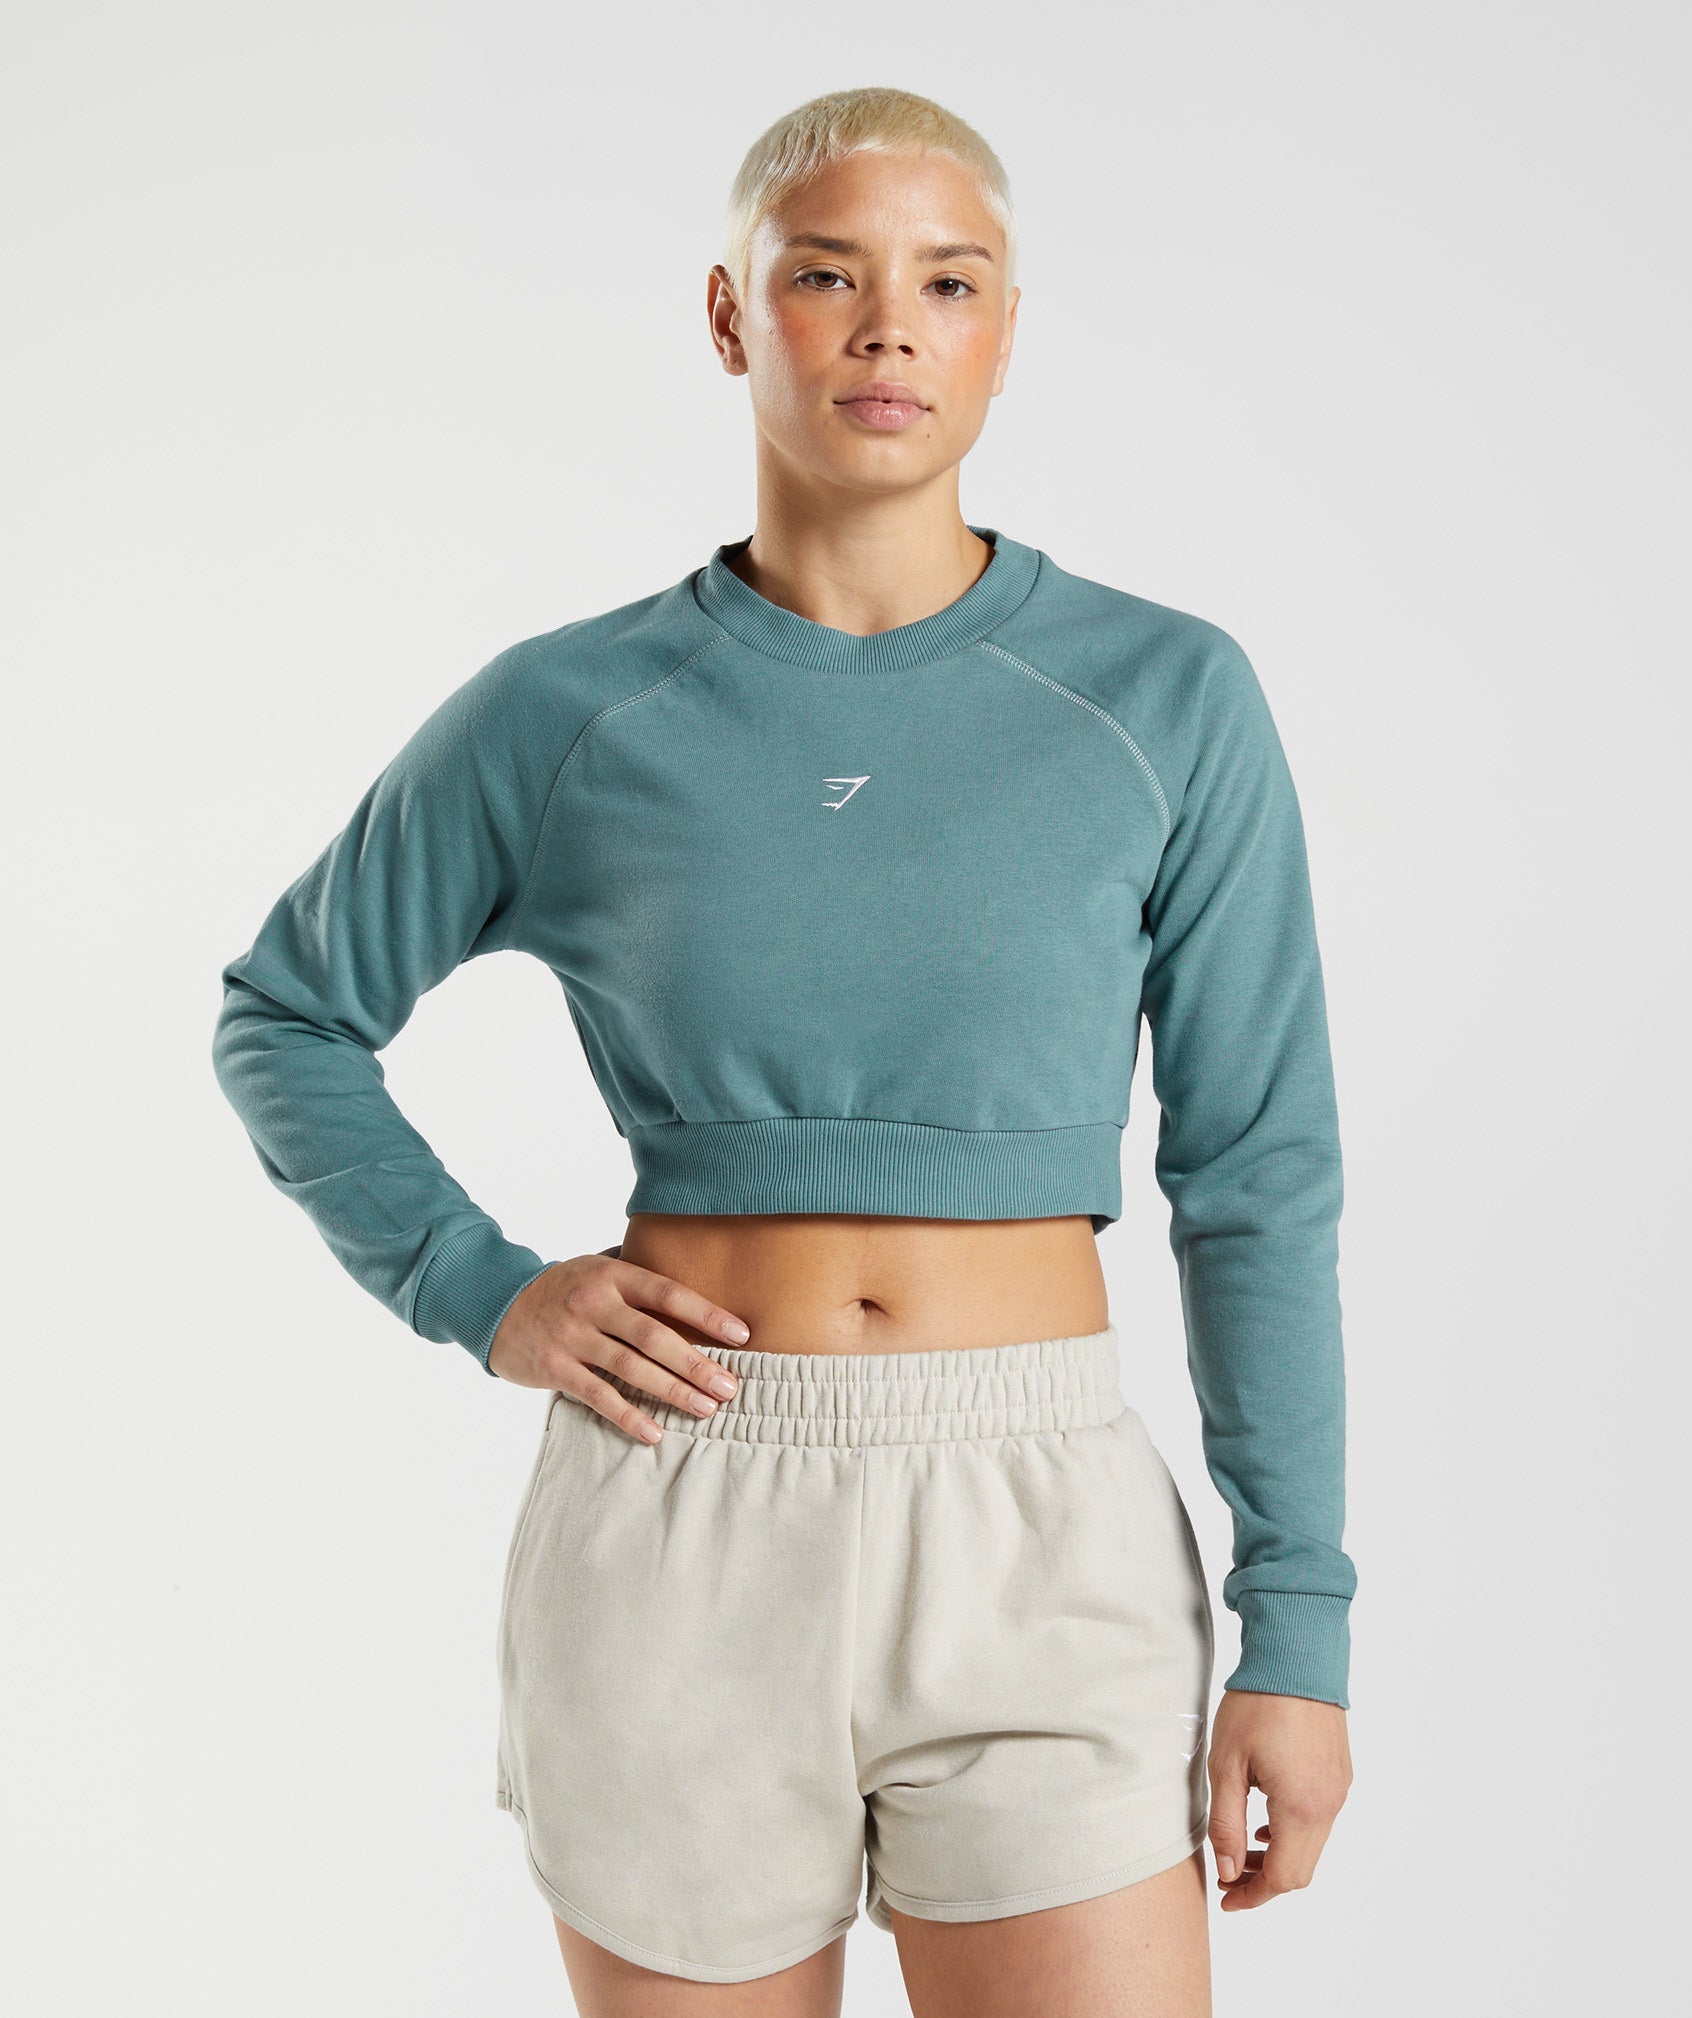 Training Cropped Sweater in {{variantColor} is out of stock